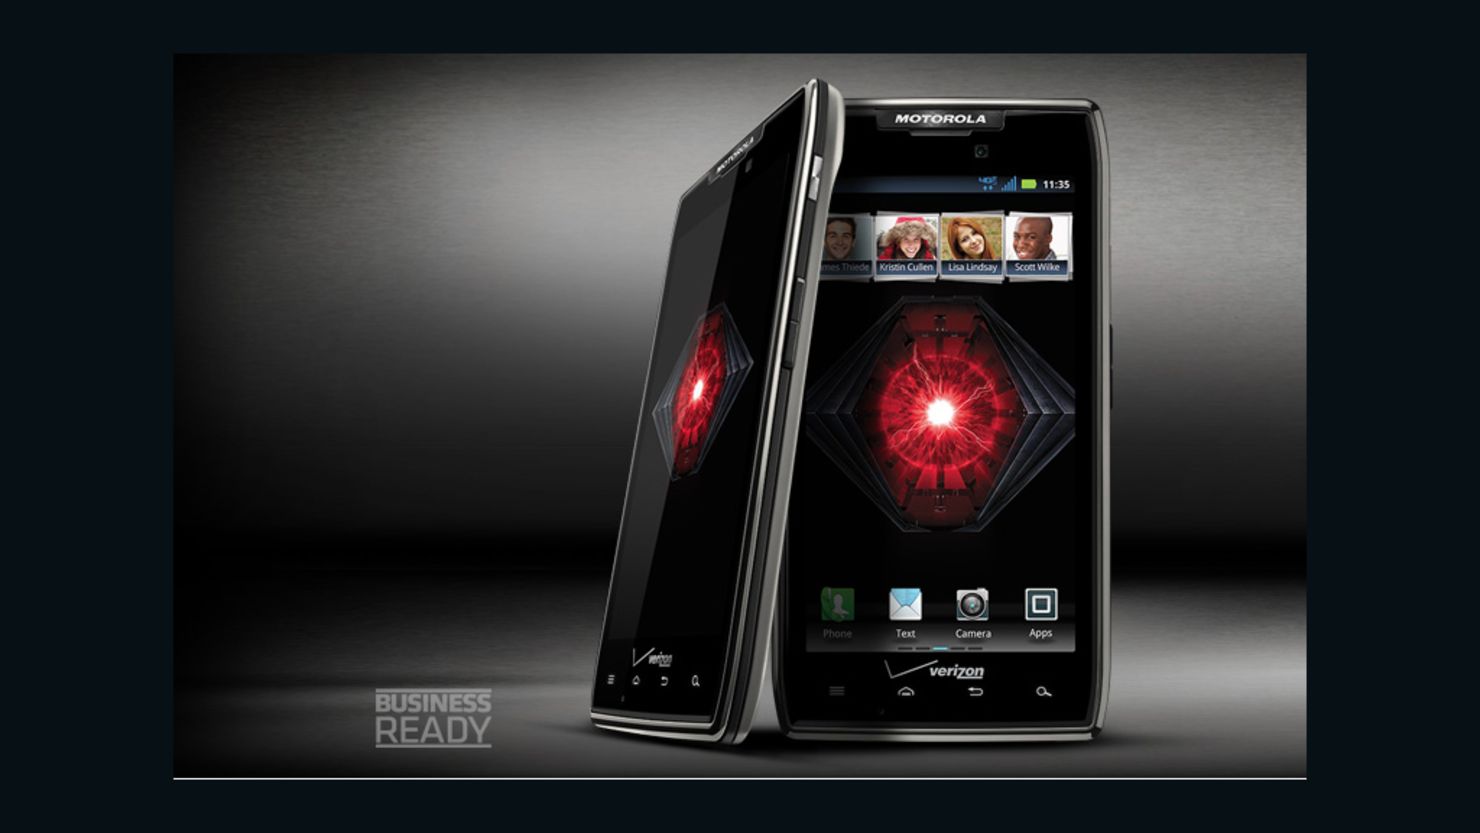 It's time room for the new kid in town -- the Motorola Droid Razr Maxx, which will be available starting January 26.